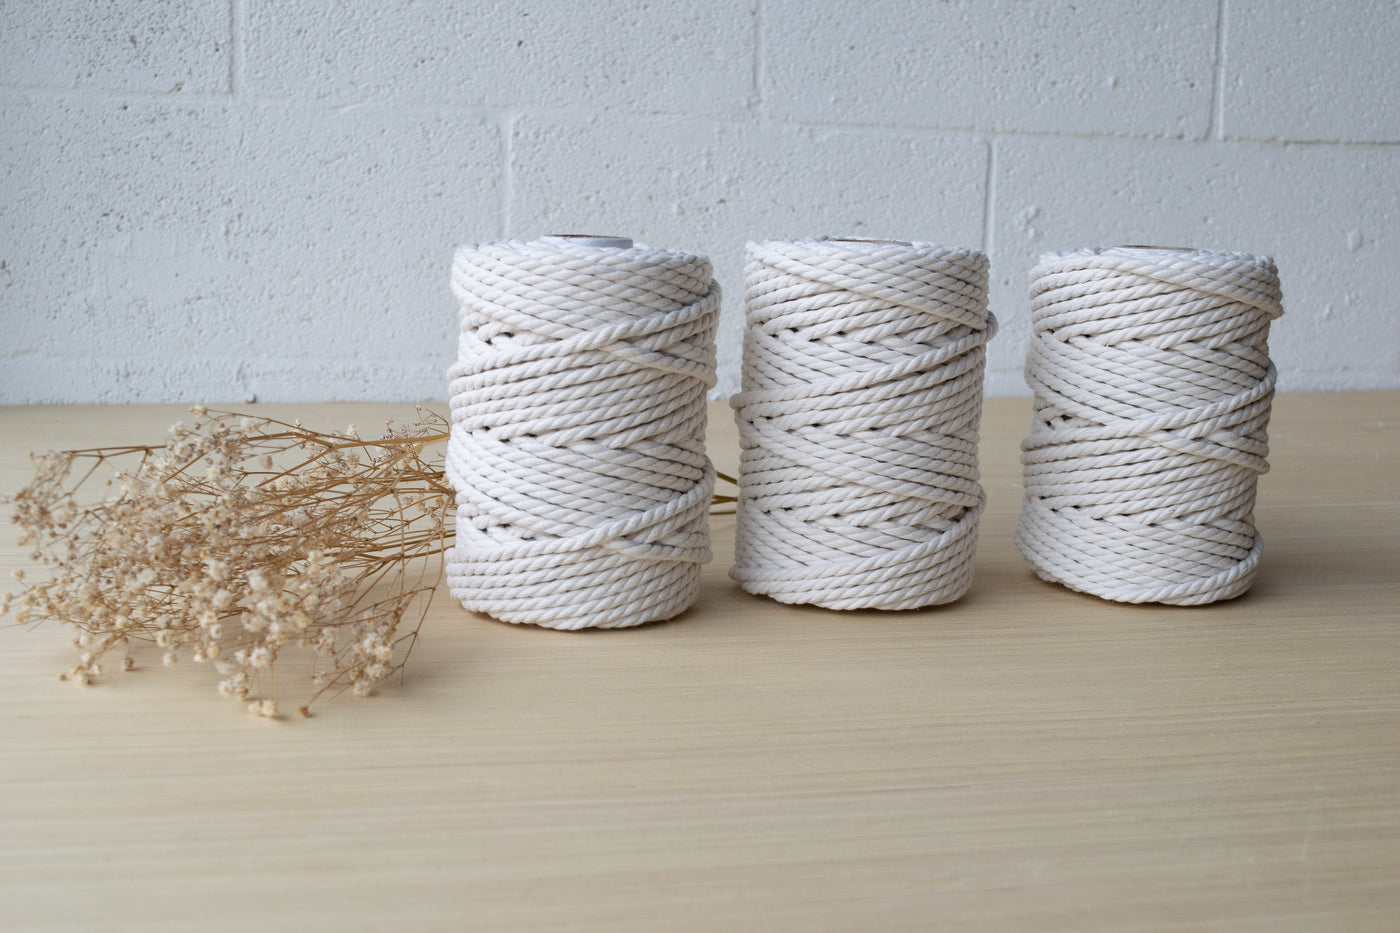 Cotton Macrame Cord 2mm Twisted Cotton Cord. 5/64 in Macrame Cord